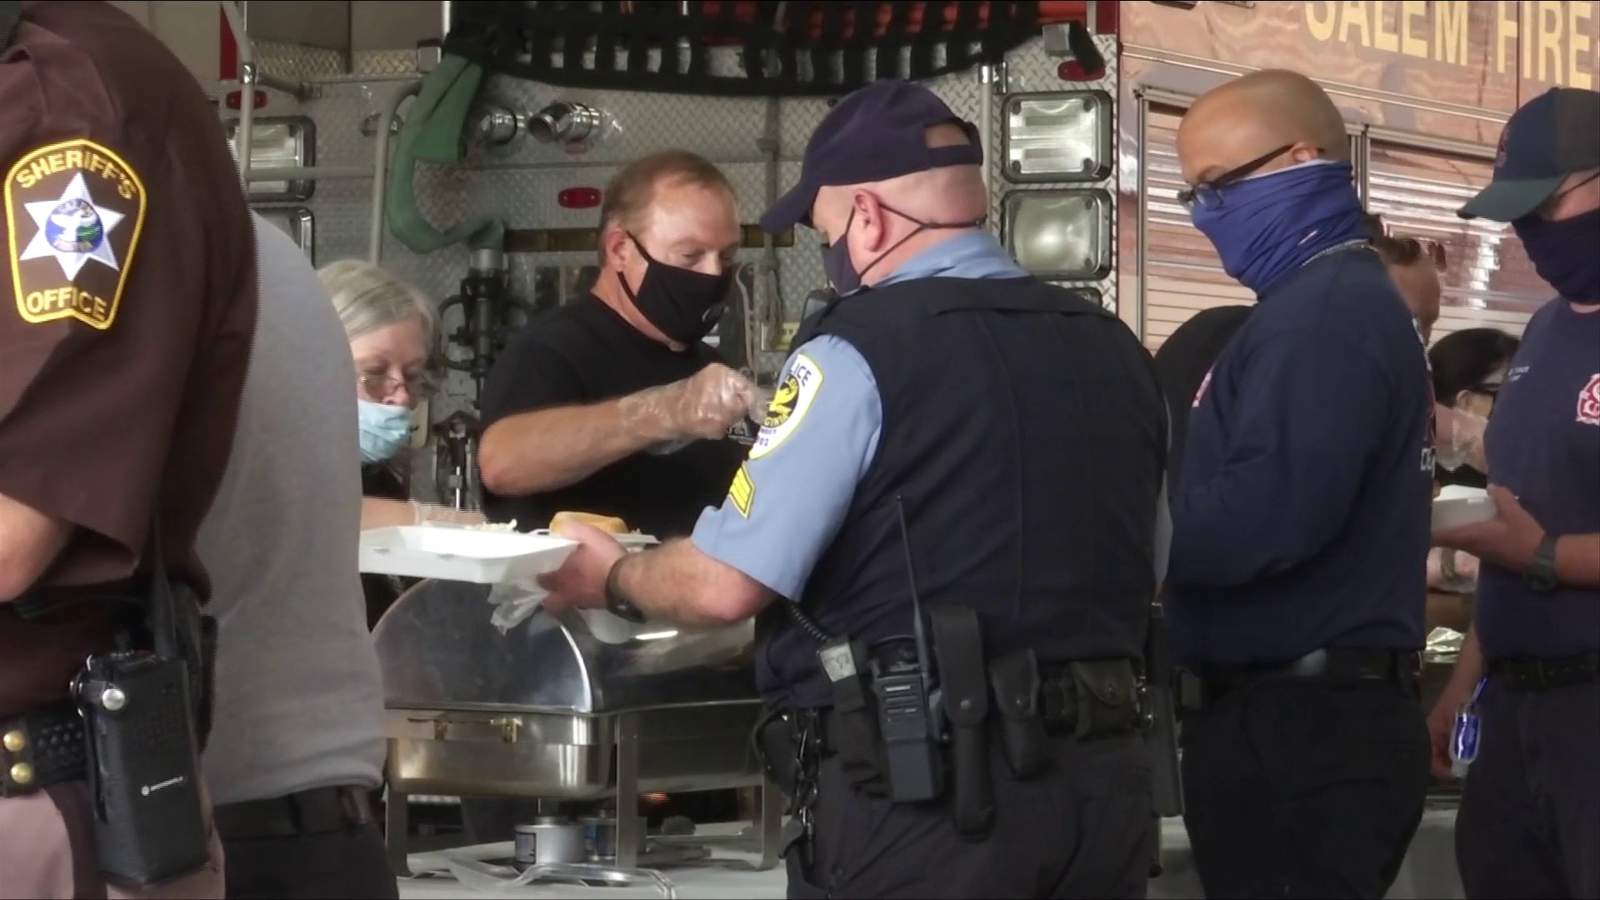 Salem funeral home provides lunch for first responders to show appreciation